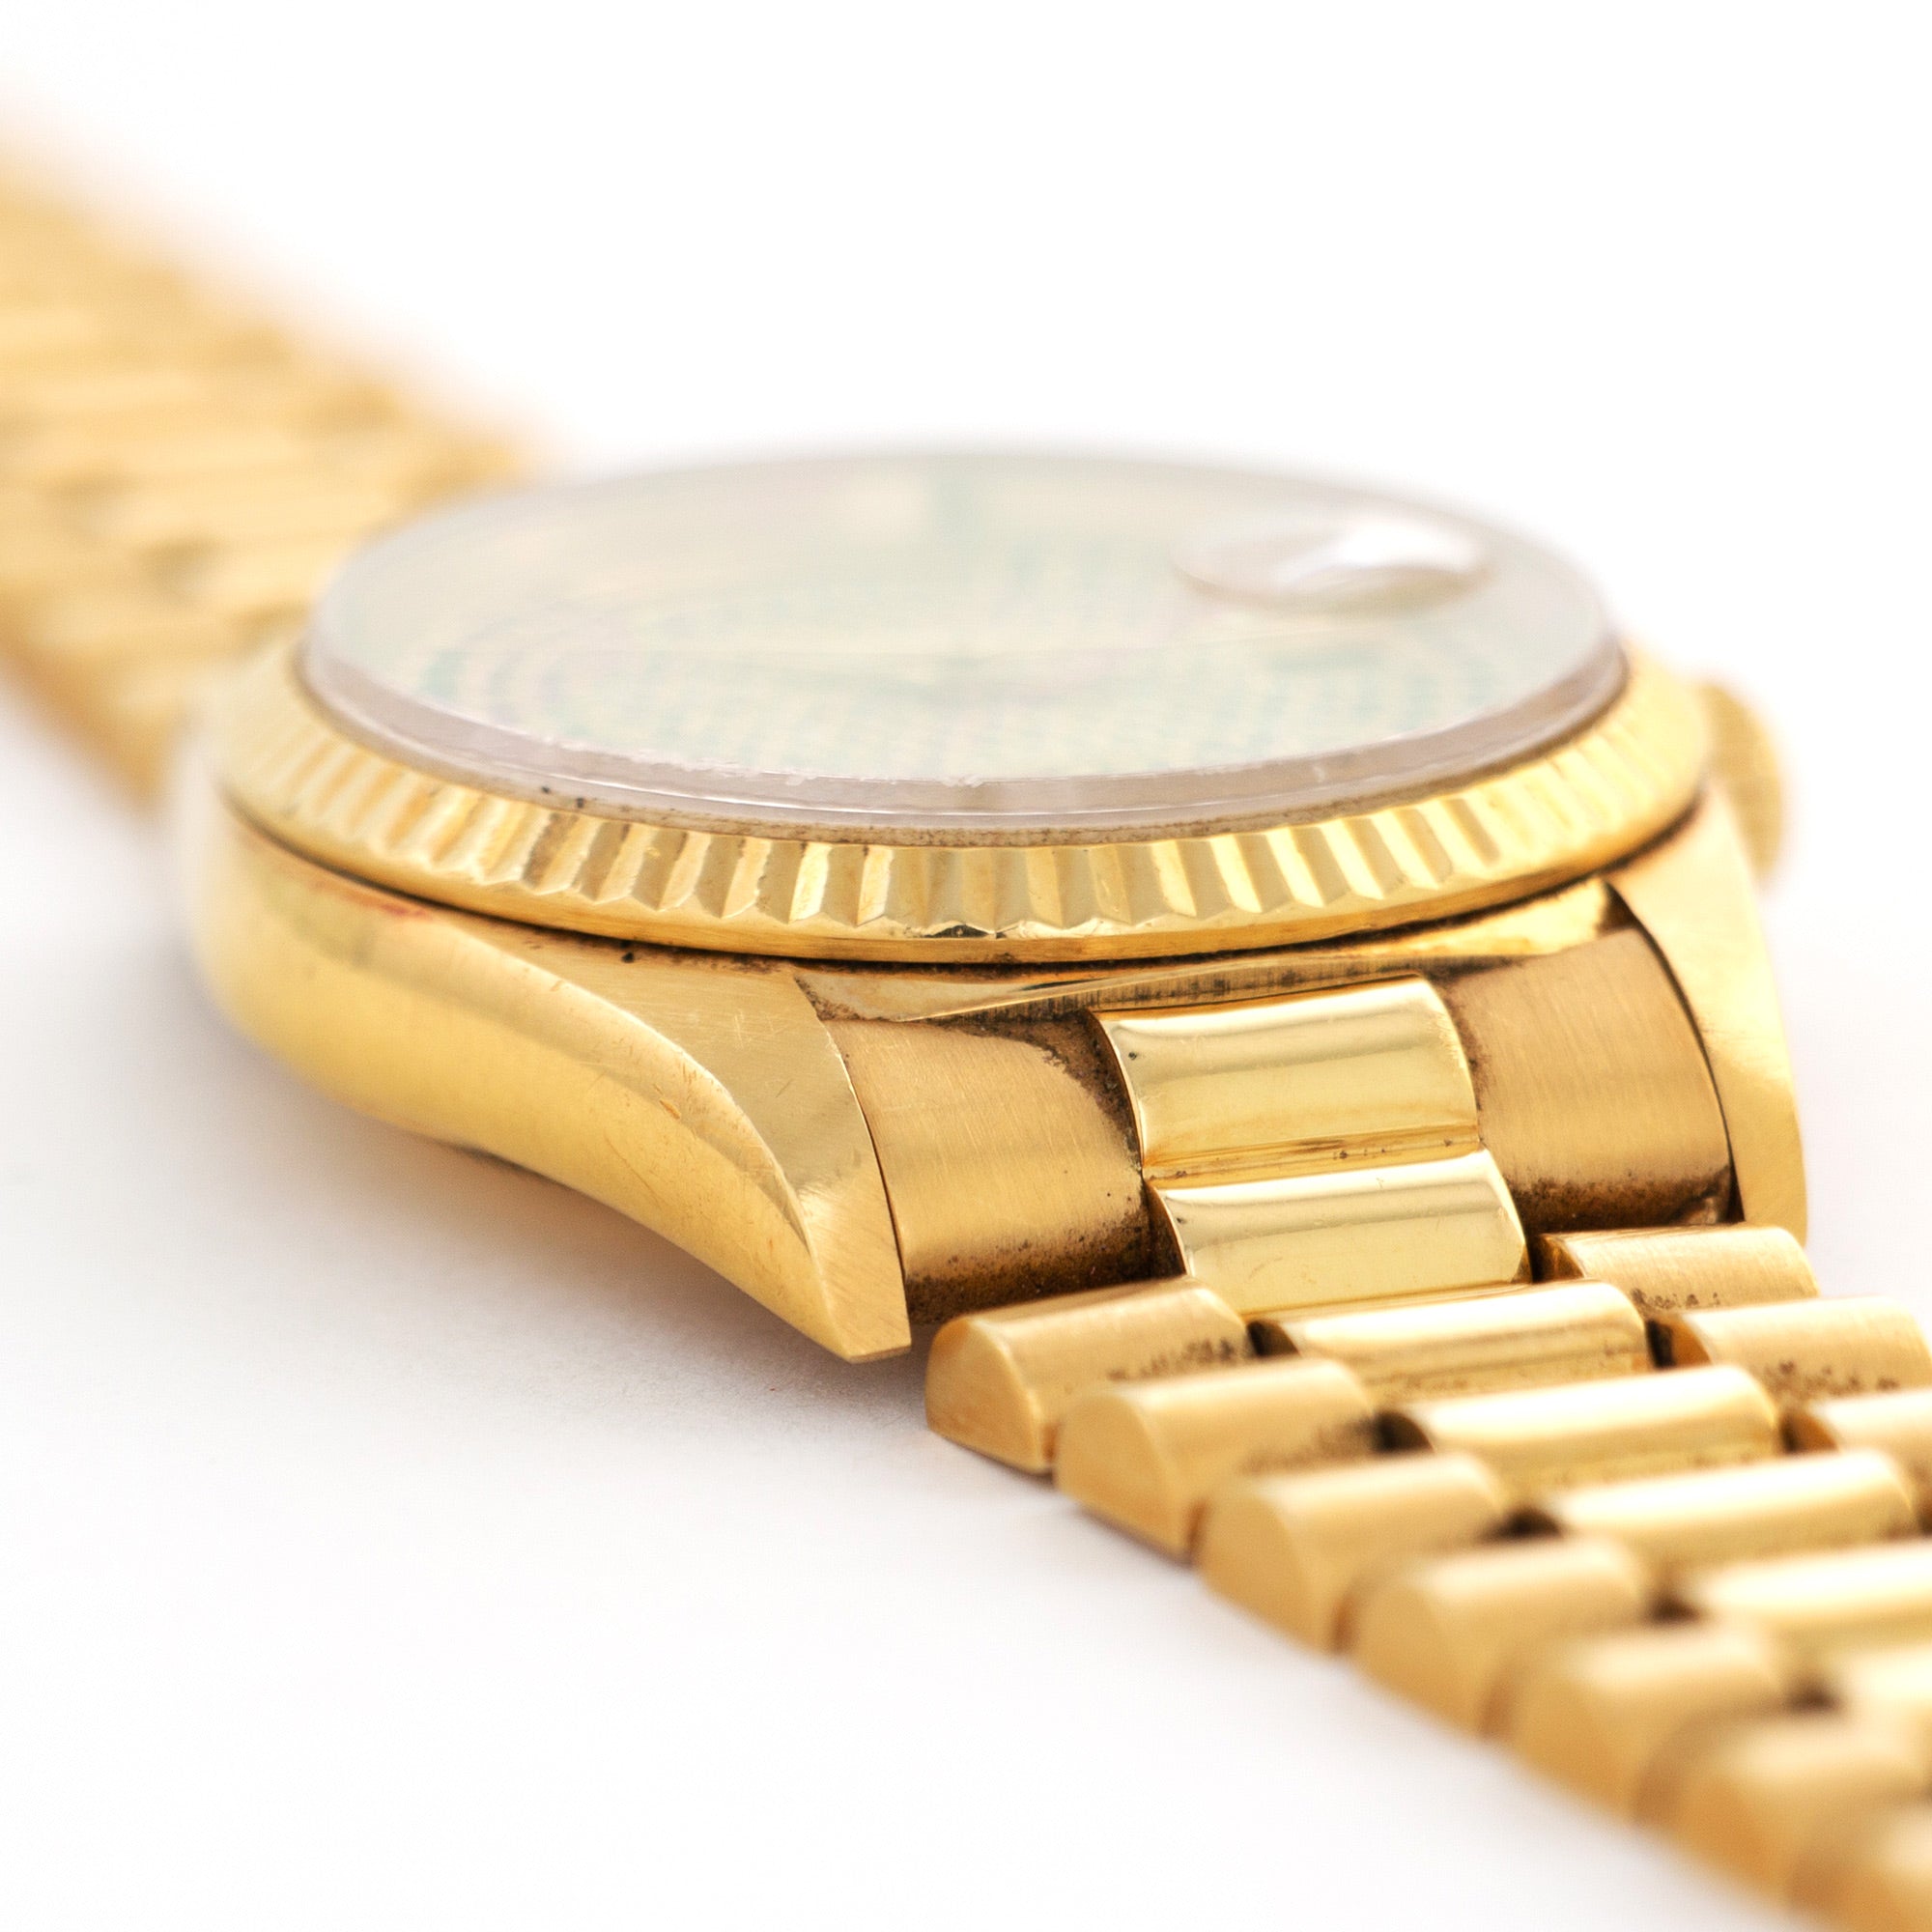 Rolex - Rolex Day-Date Yellow Gold with Pave Dial Ref. 18238 - The Keystone Watches